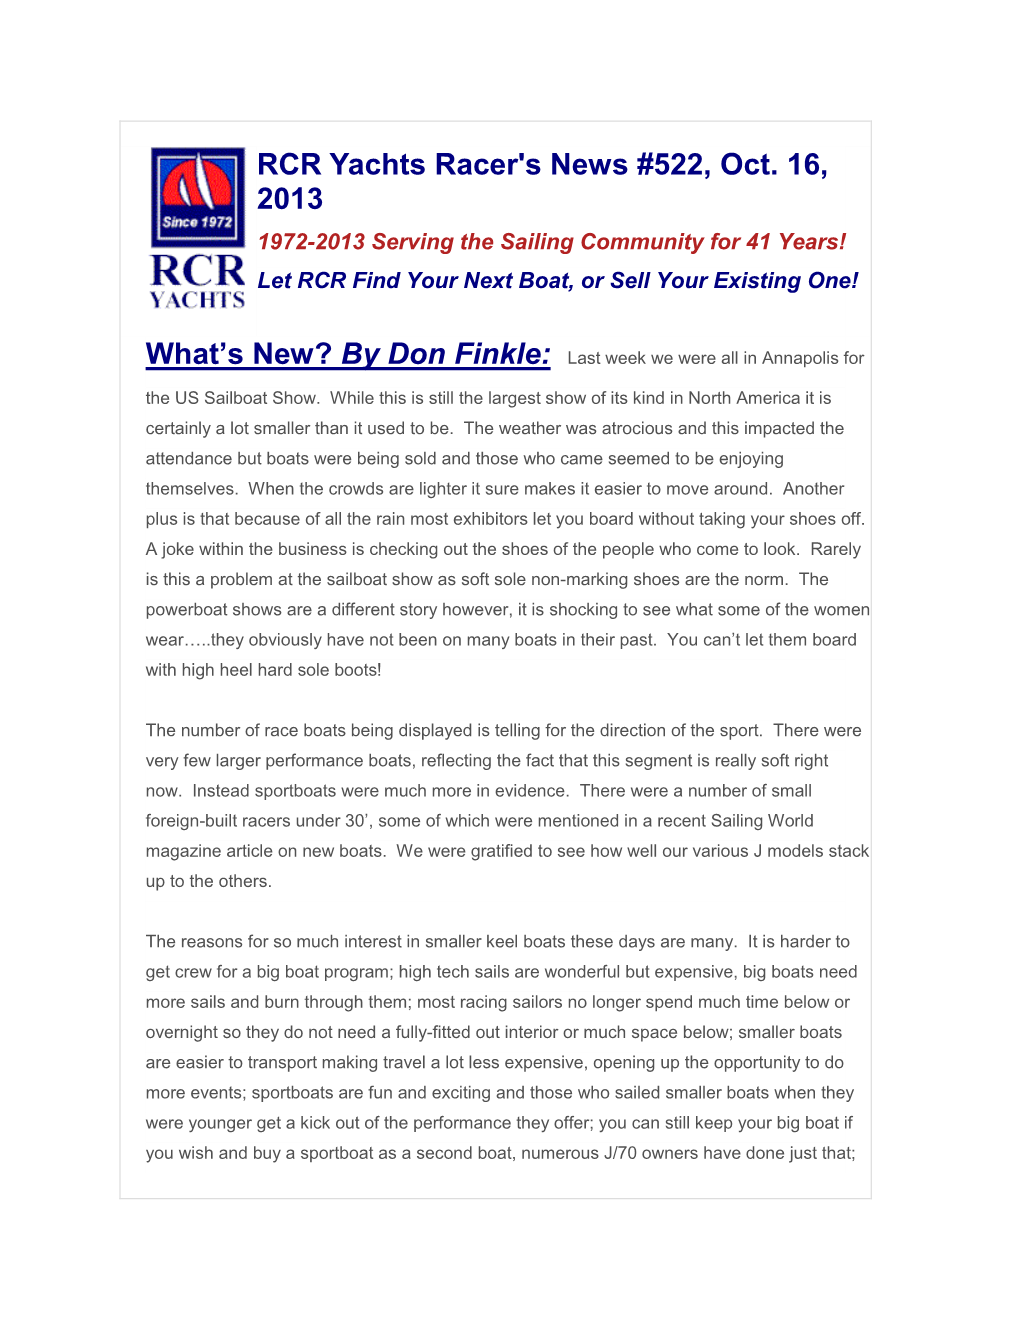 RCR Yachts Racer's News #522, Oct. 16, 2013 1972-2013 Serving the Sailing Community for 41 Years!